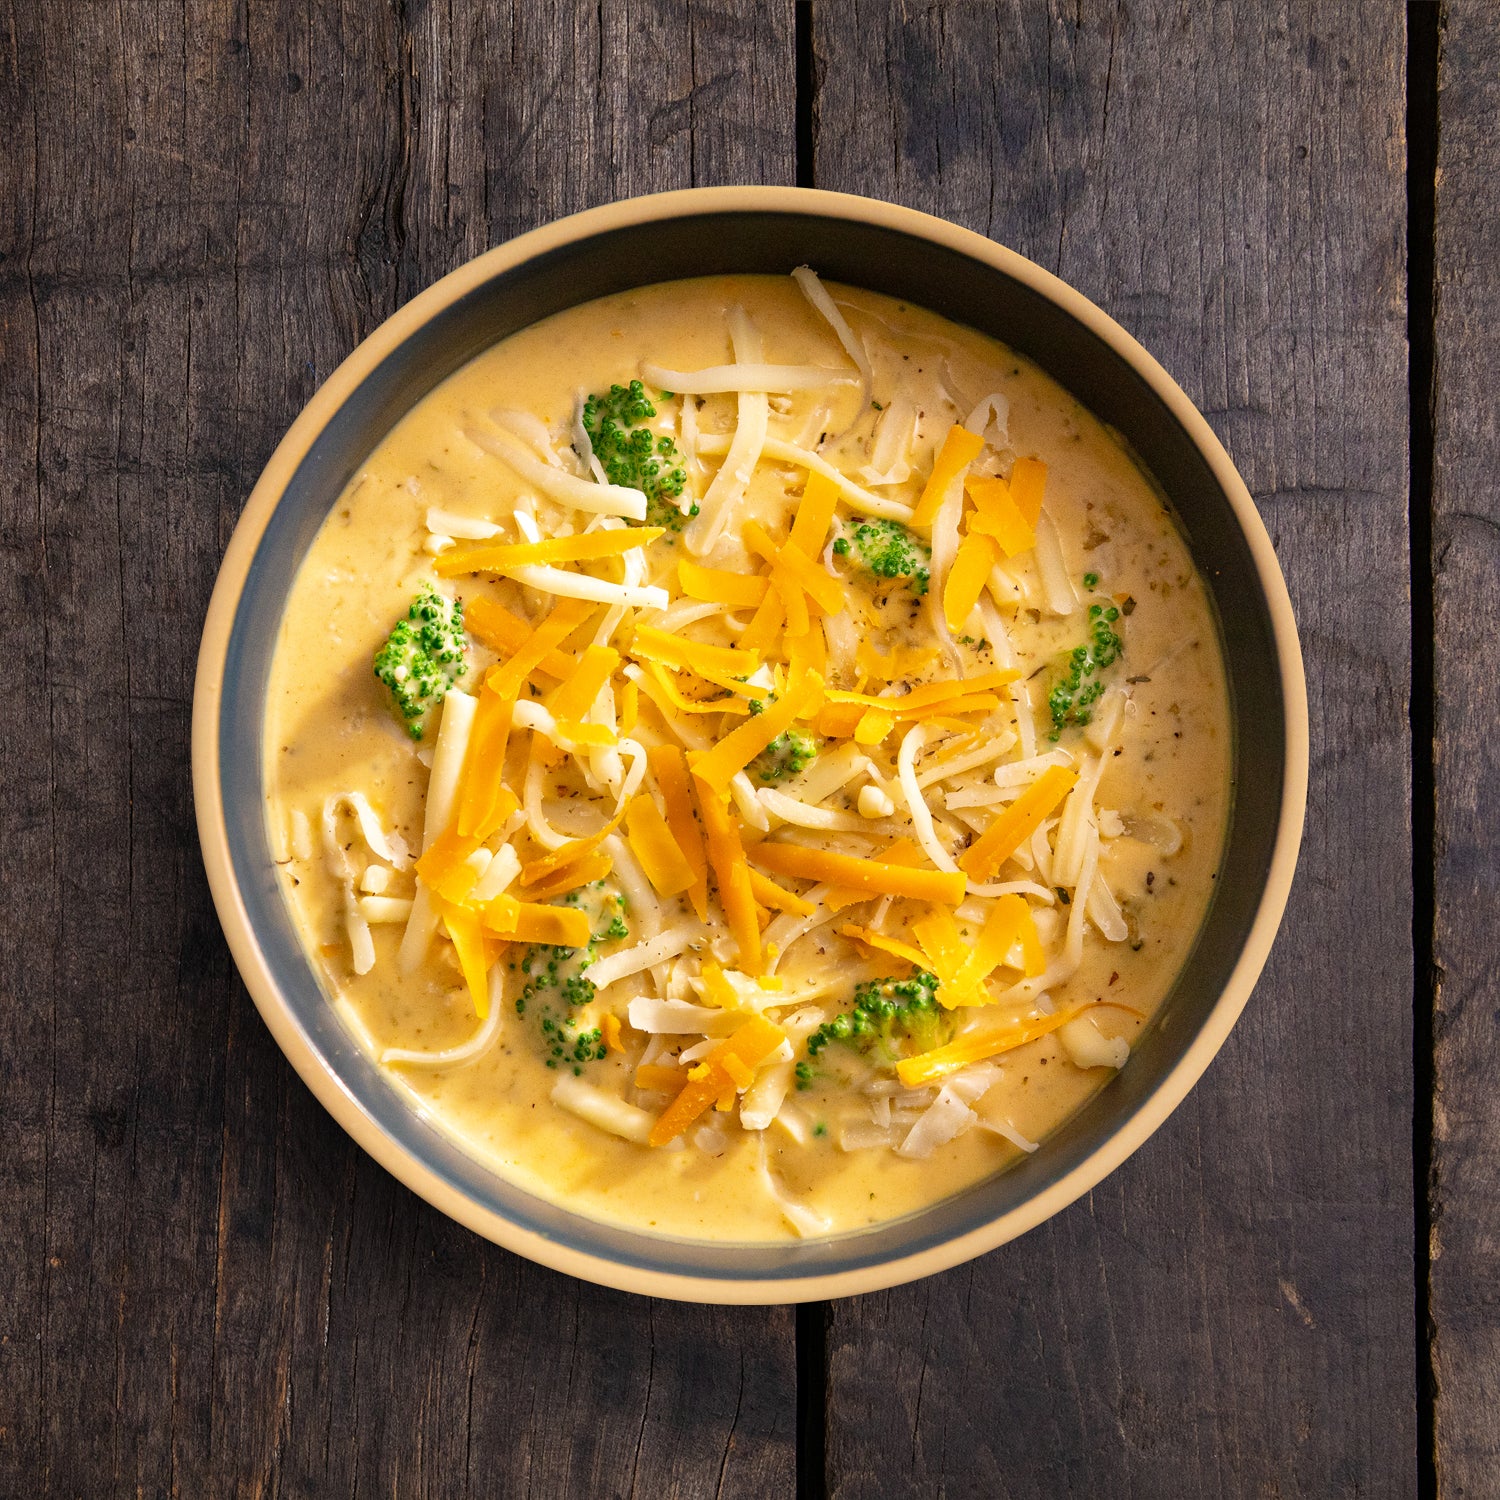 Decorated Broccoli Cheddar Soup in Bowl - Eat Proper Good